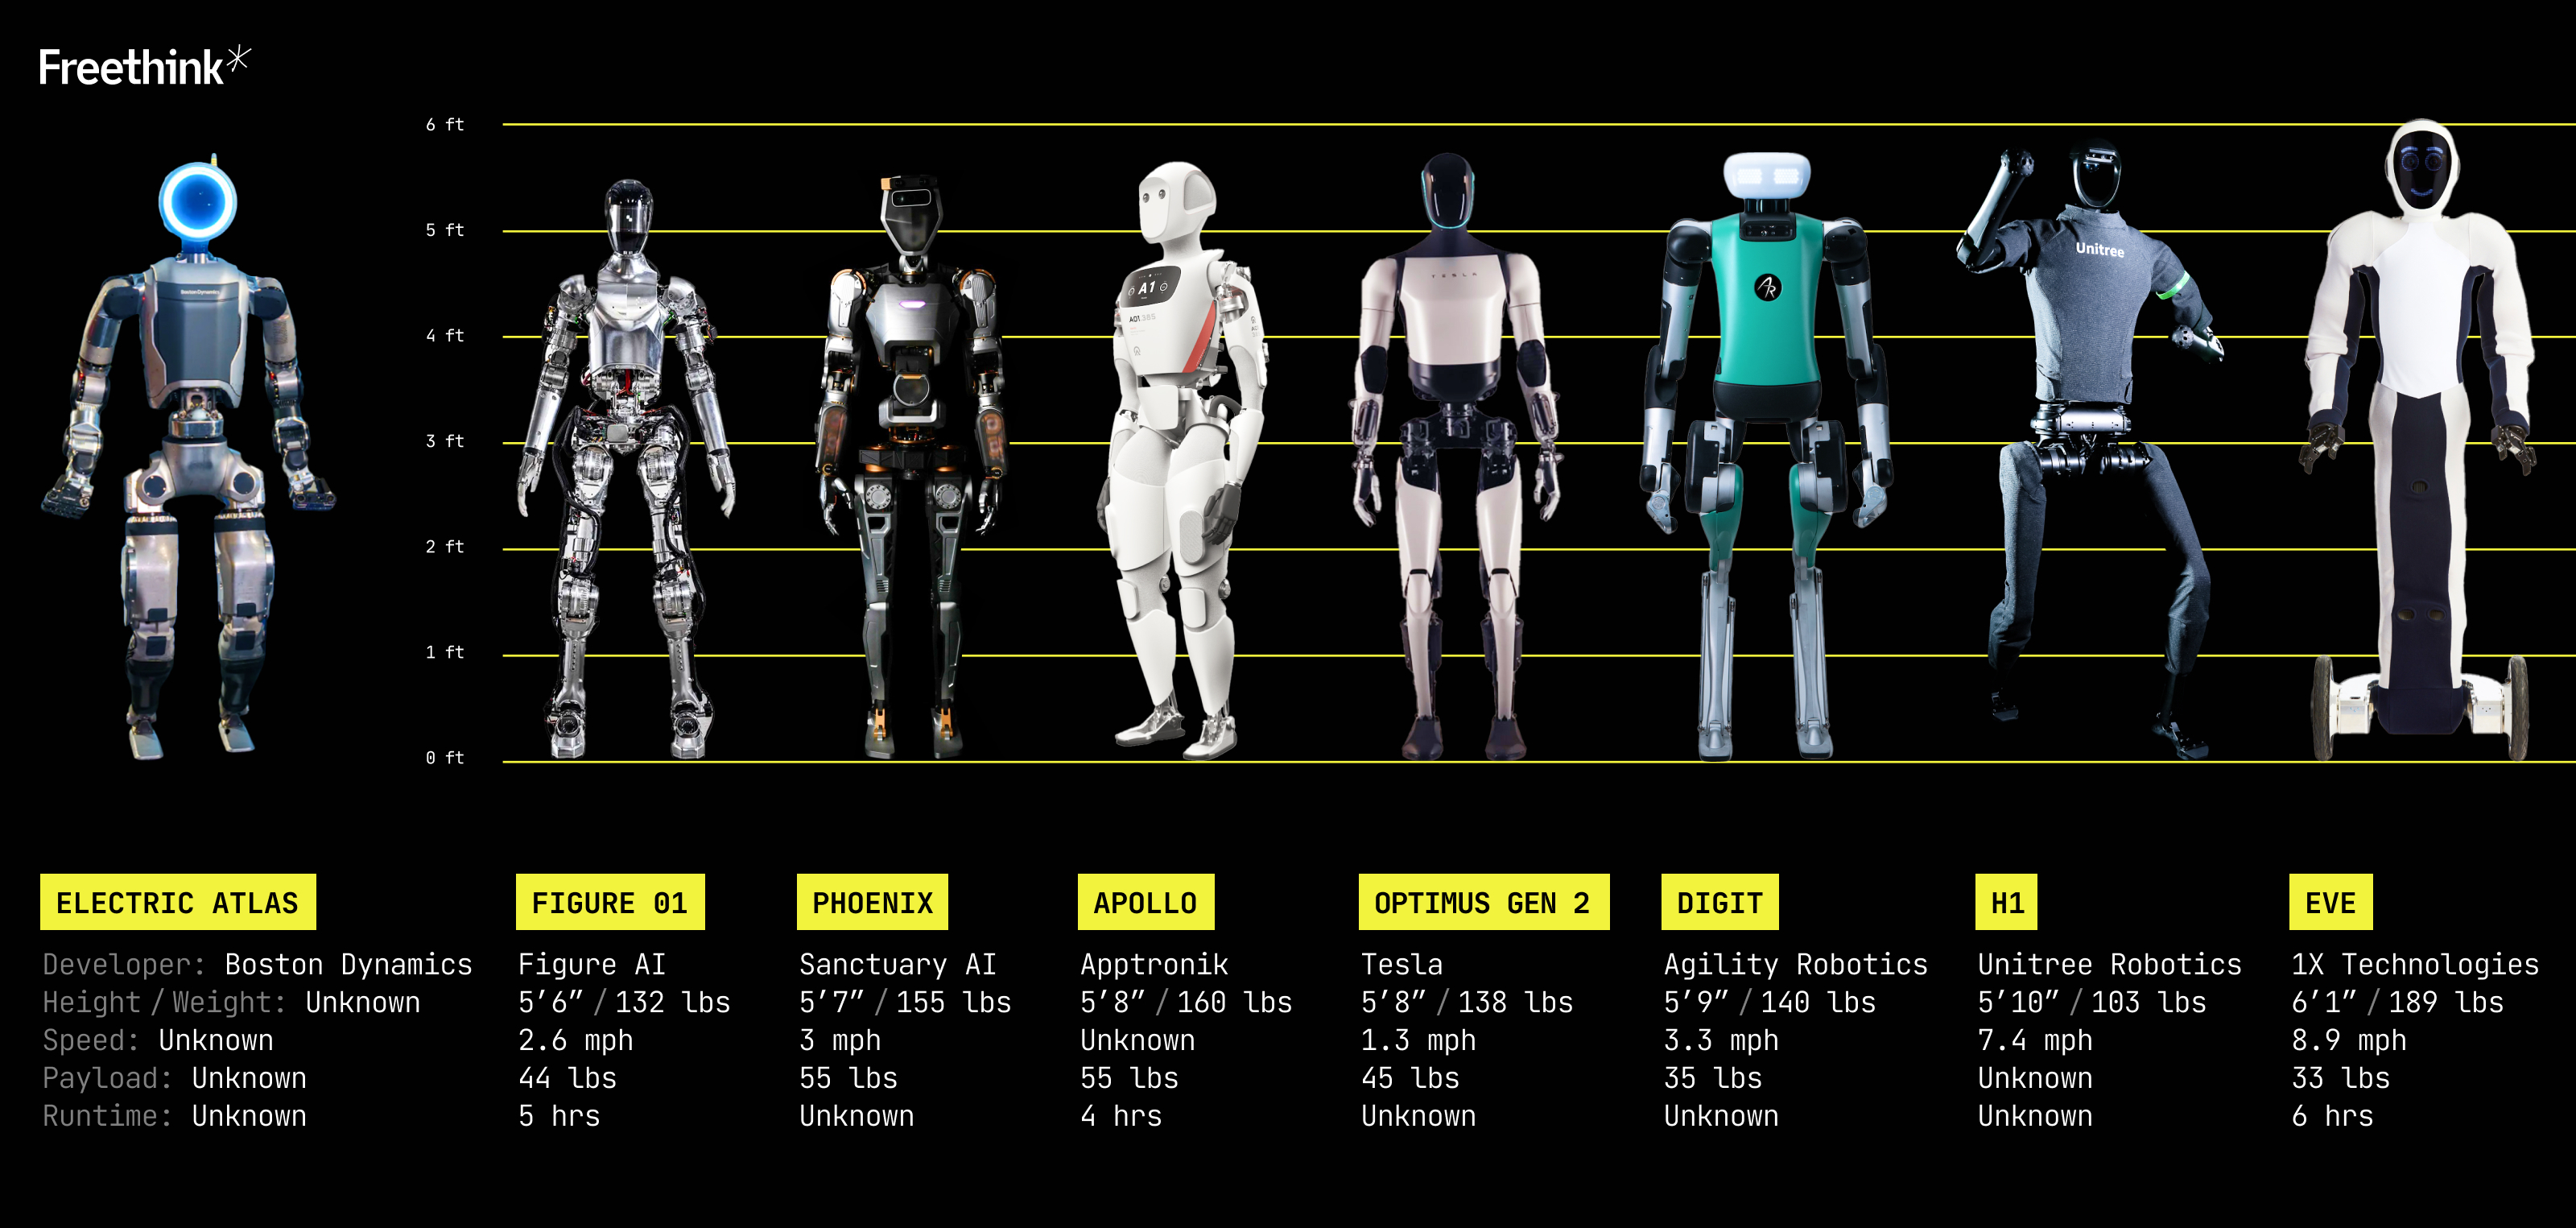 Lineup of various humanoid robotics models, each differentiated by design and size with specifications listed below, against a dark background.